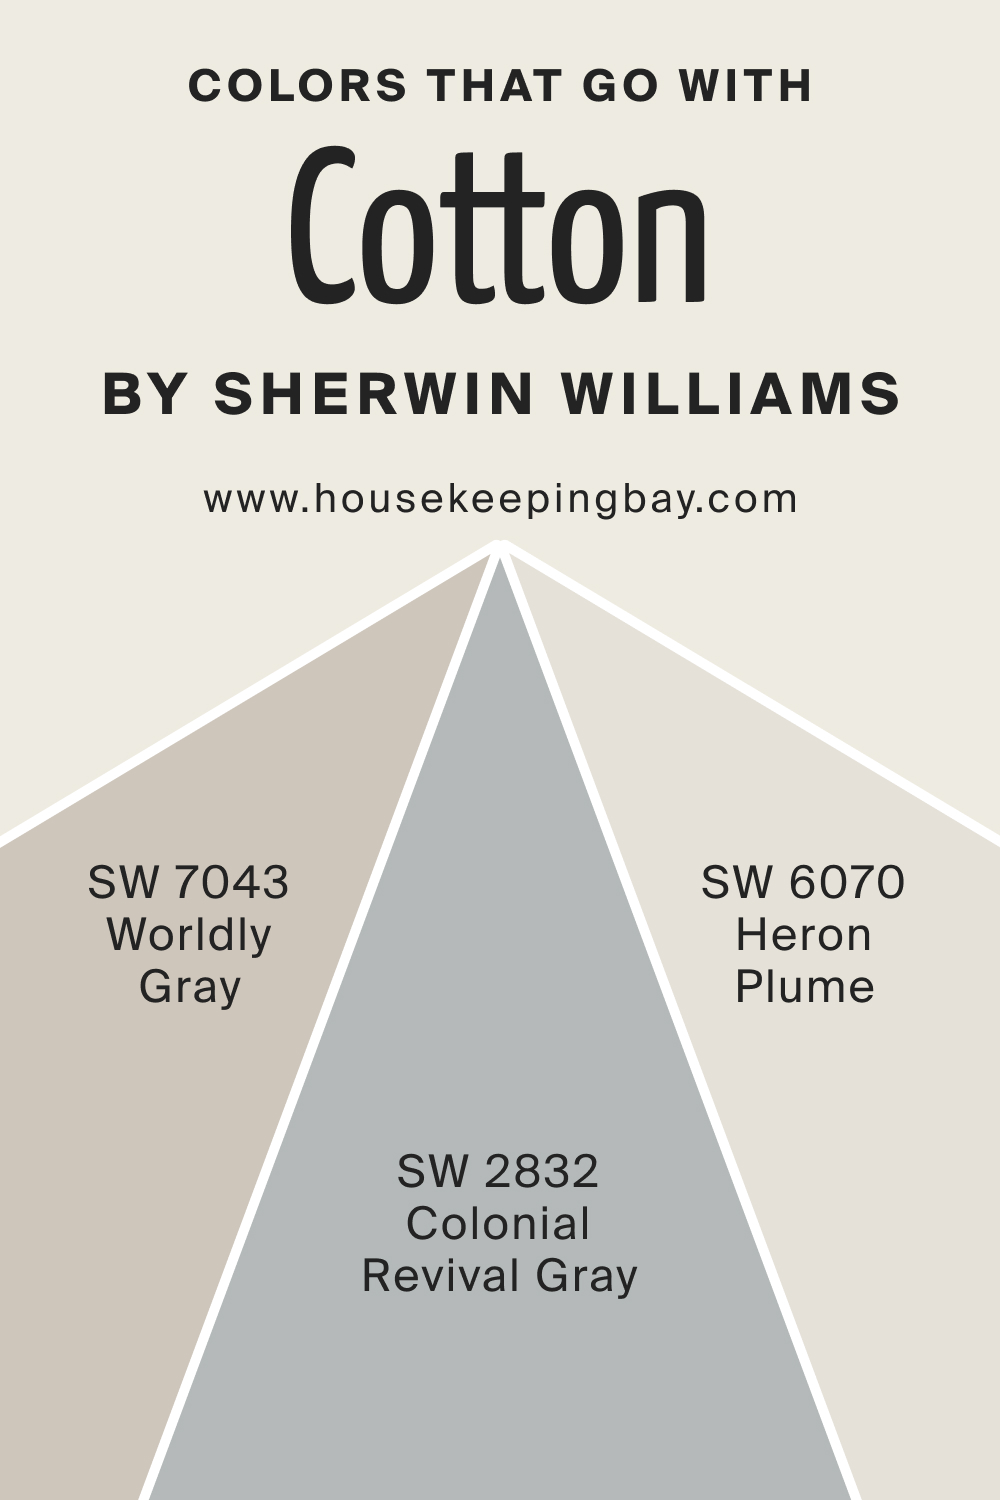 Colors that goes with SW 9581 Cotton by Sherwin Williams